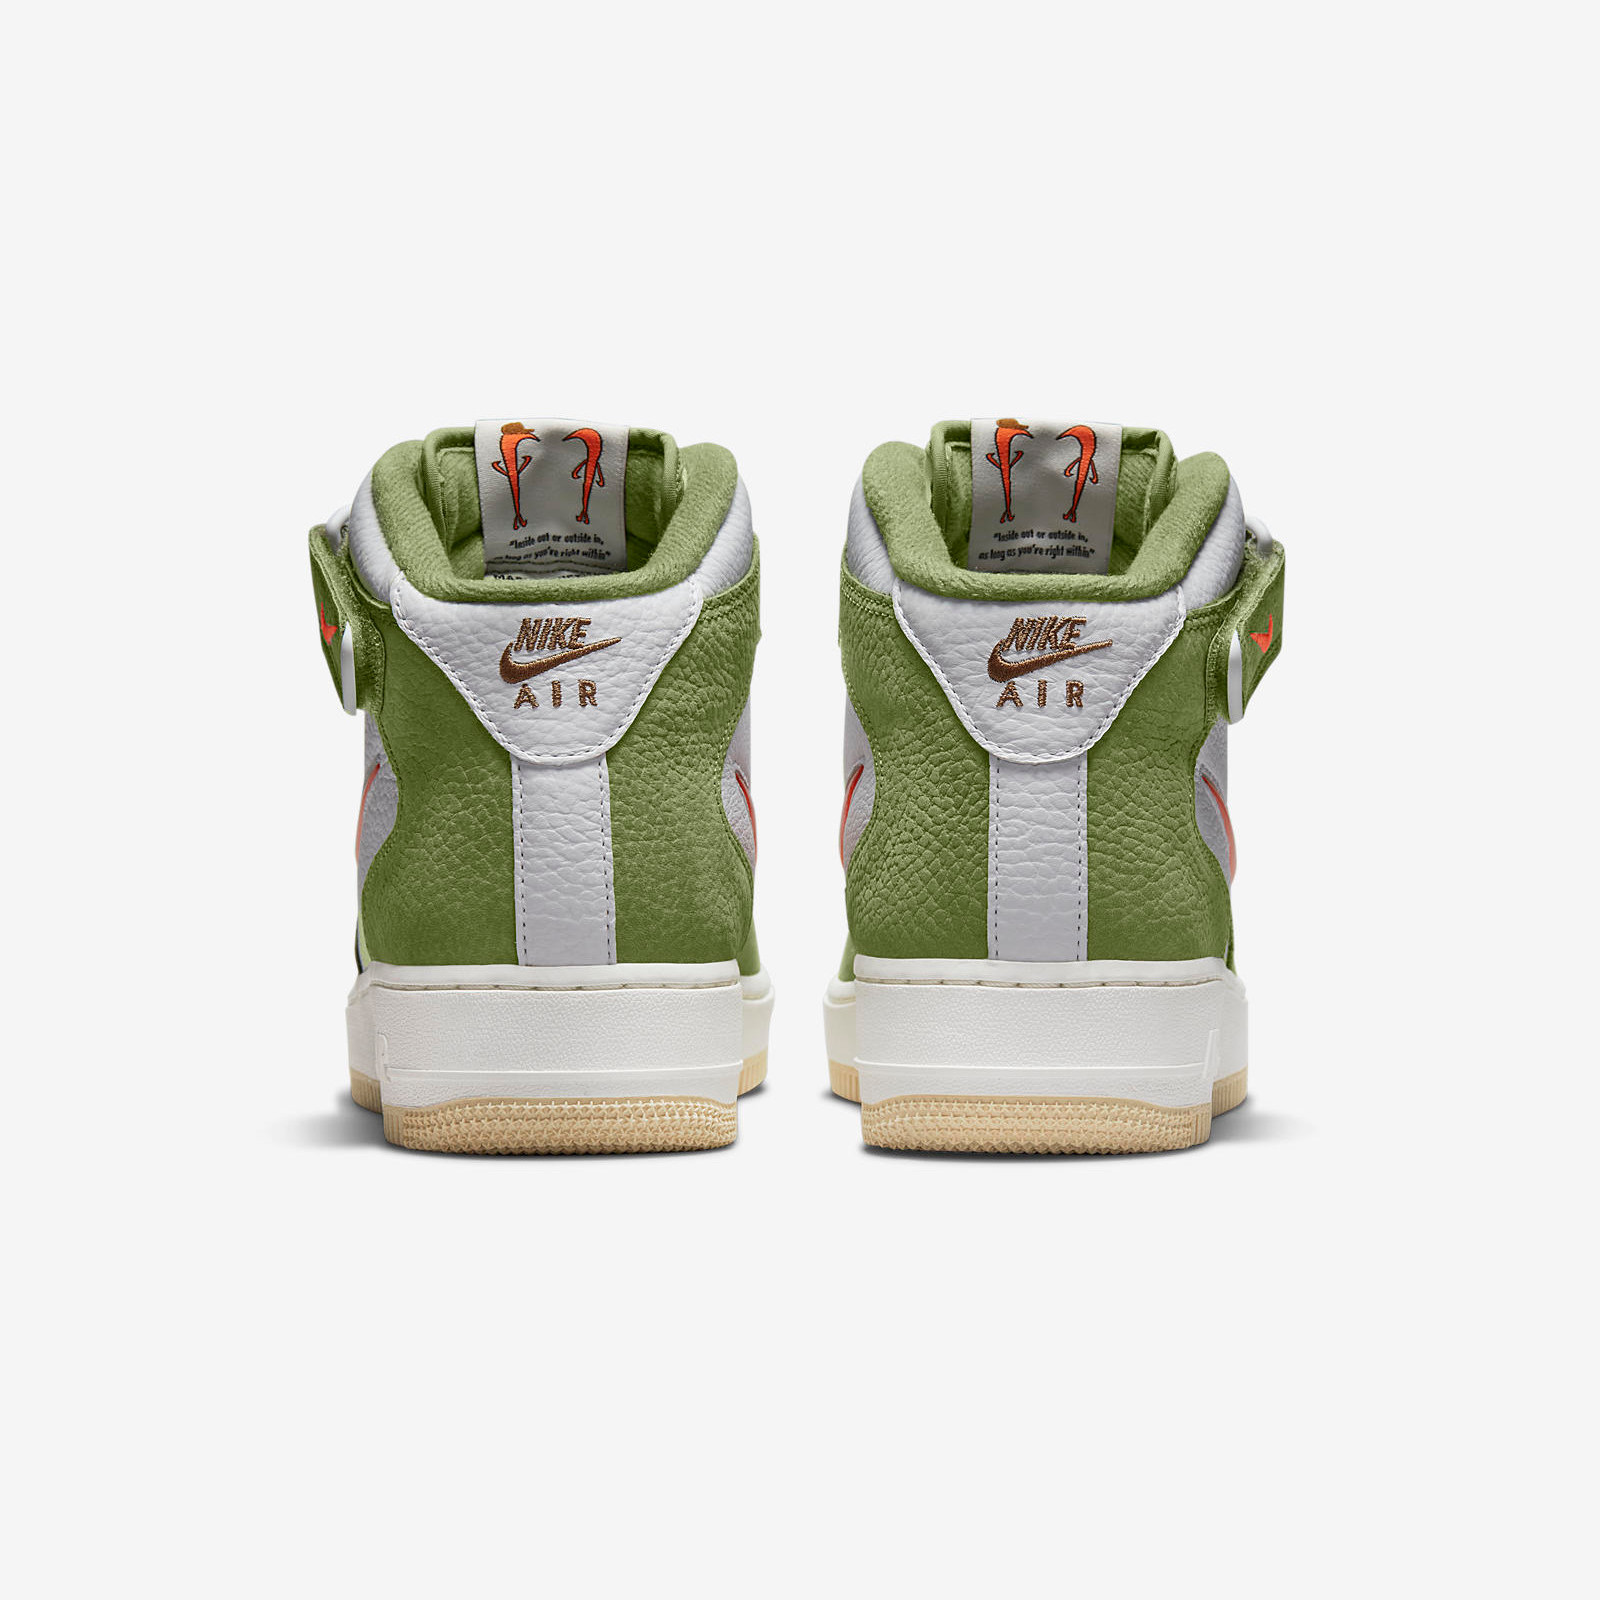 Nike Air Force 1 Mid
« Olive Green »